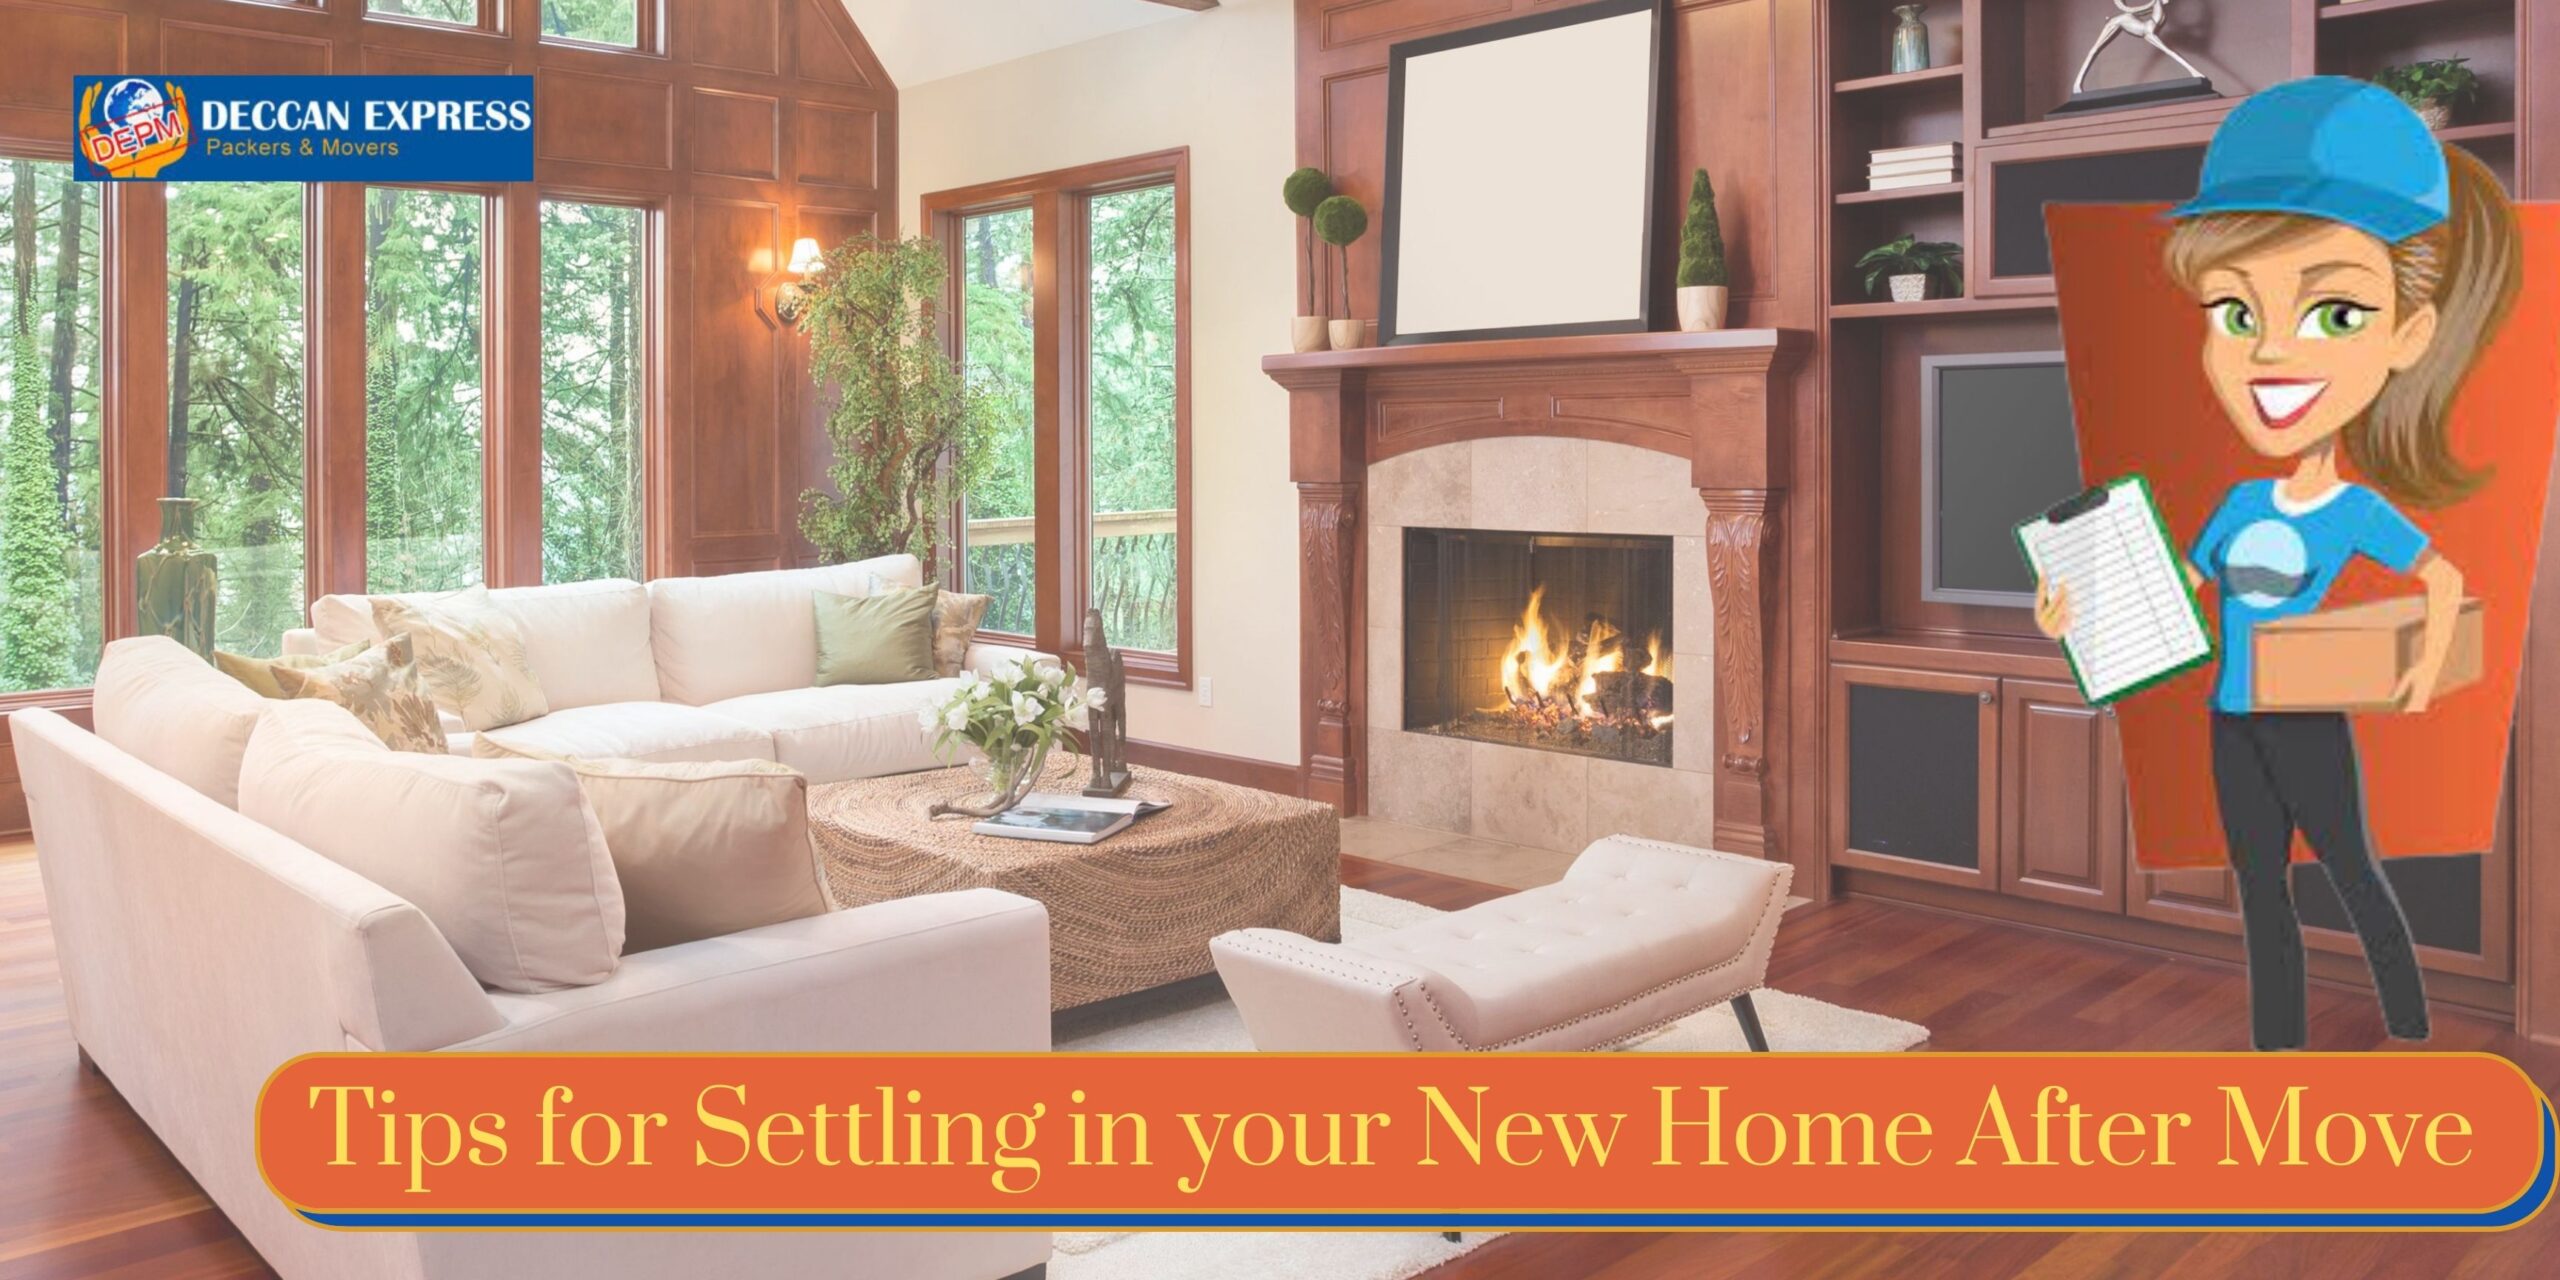 Tips for Settling in your New Home After Move